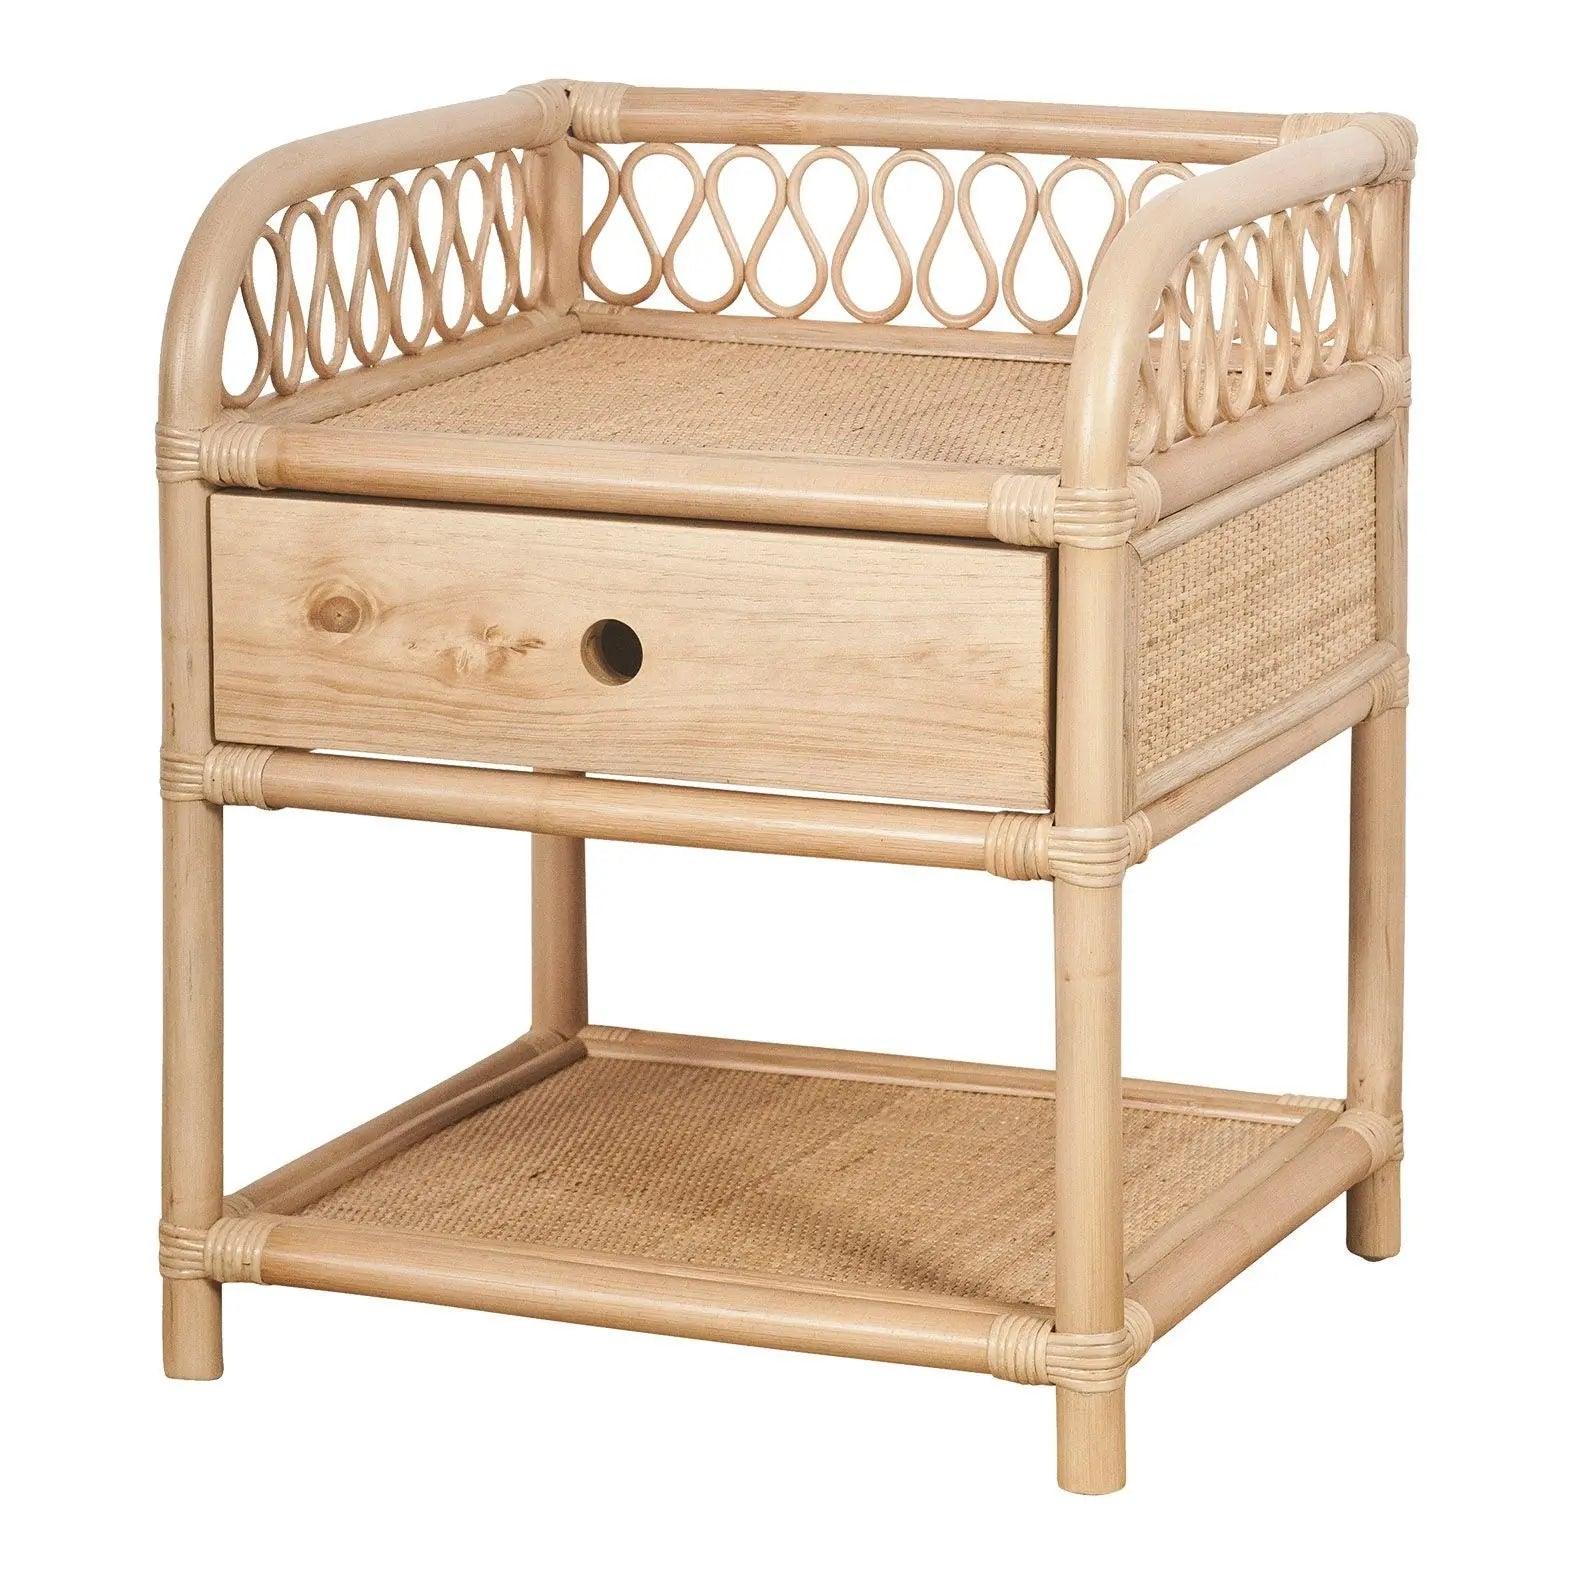 Lulu Bed Side Cabinet The Family Love Tree